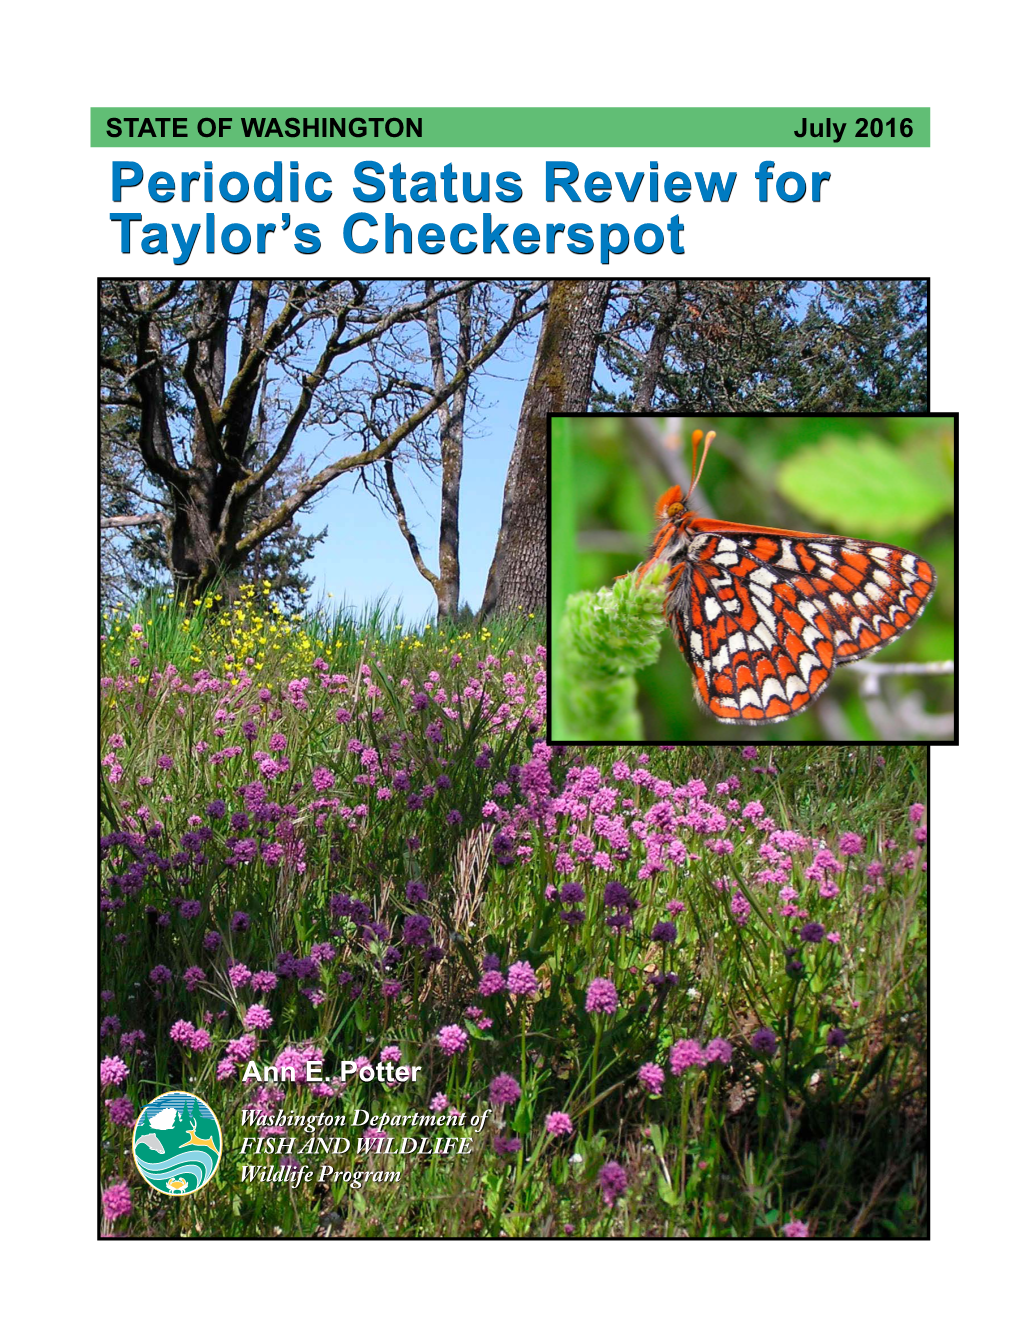 Washington State Periodic Status Review for the Taylor's Checkerspot